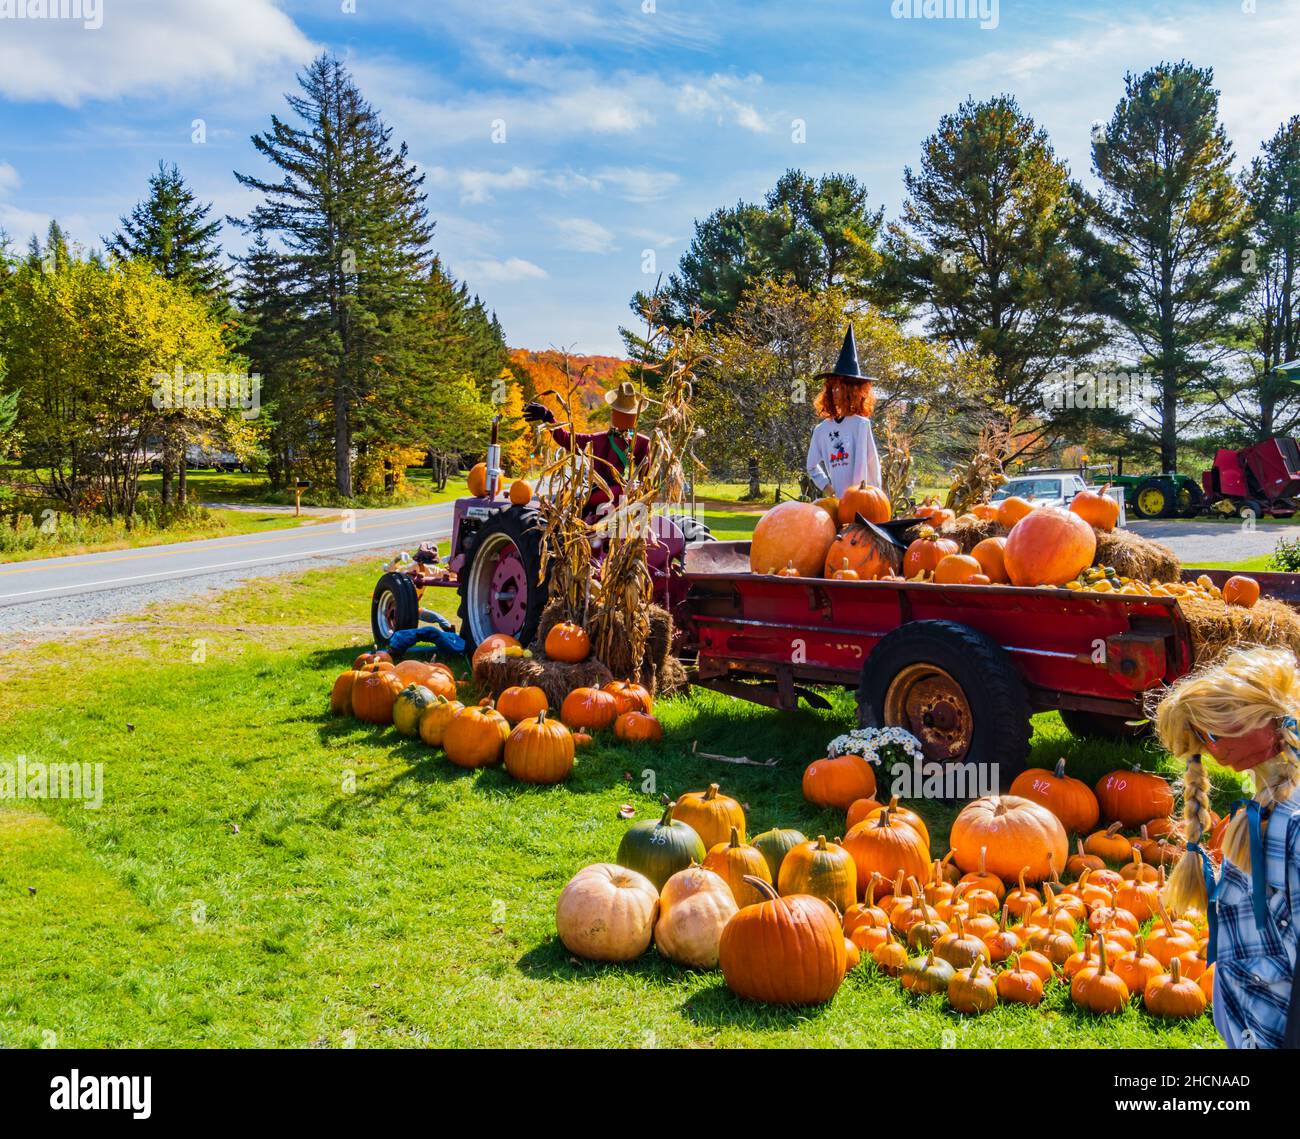 farmstand along the road decorated with Halloween scarecrows, old wagon and tractor, pumpkins and Jack O' Lanterns Stock Photo